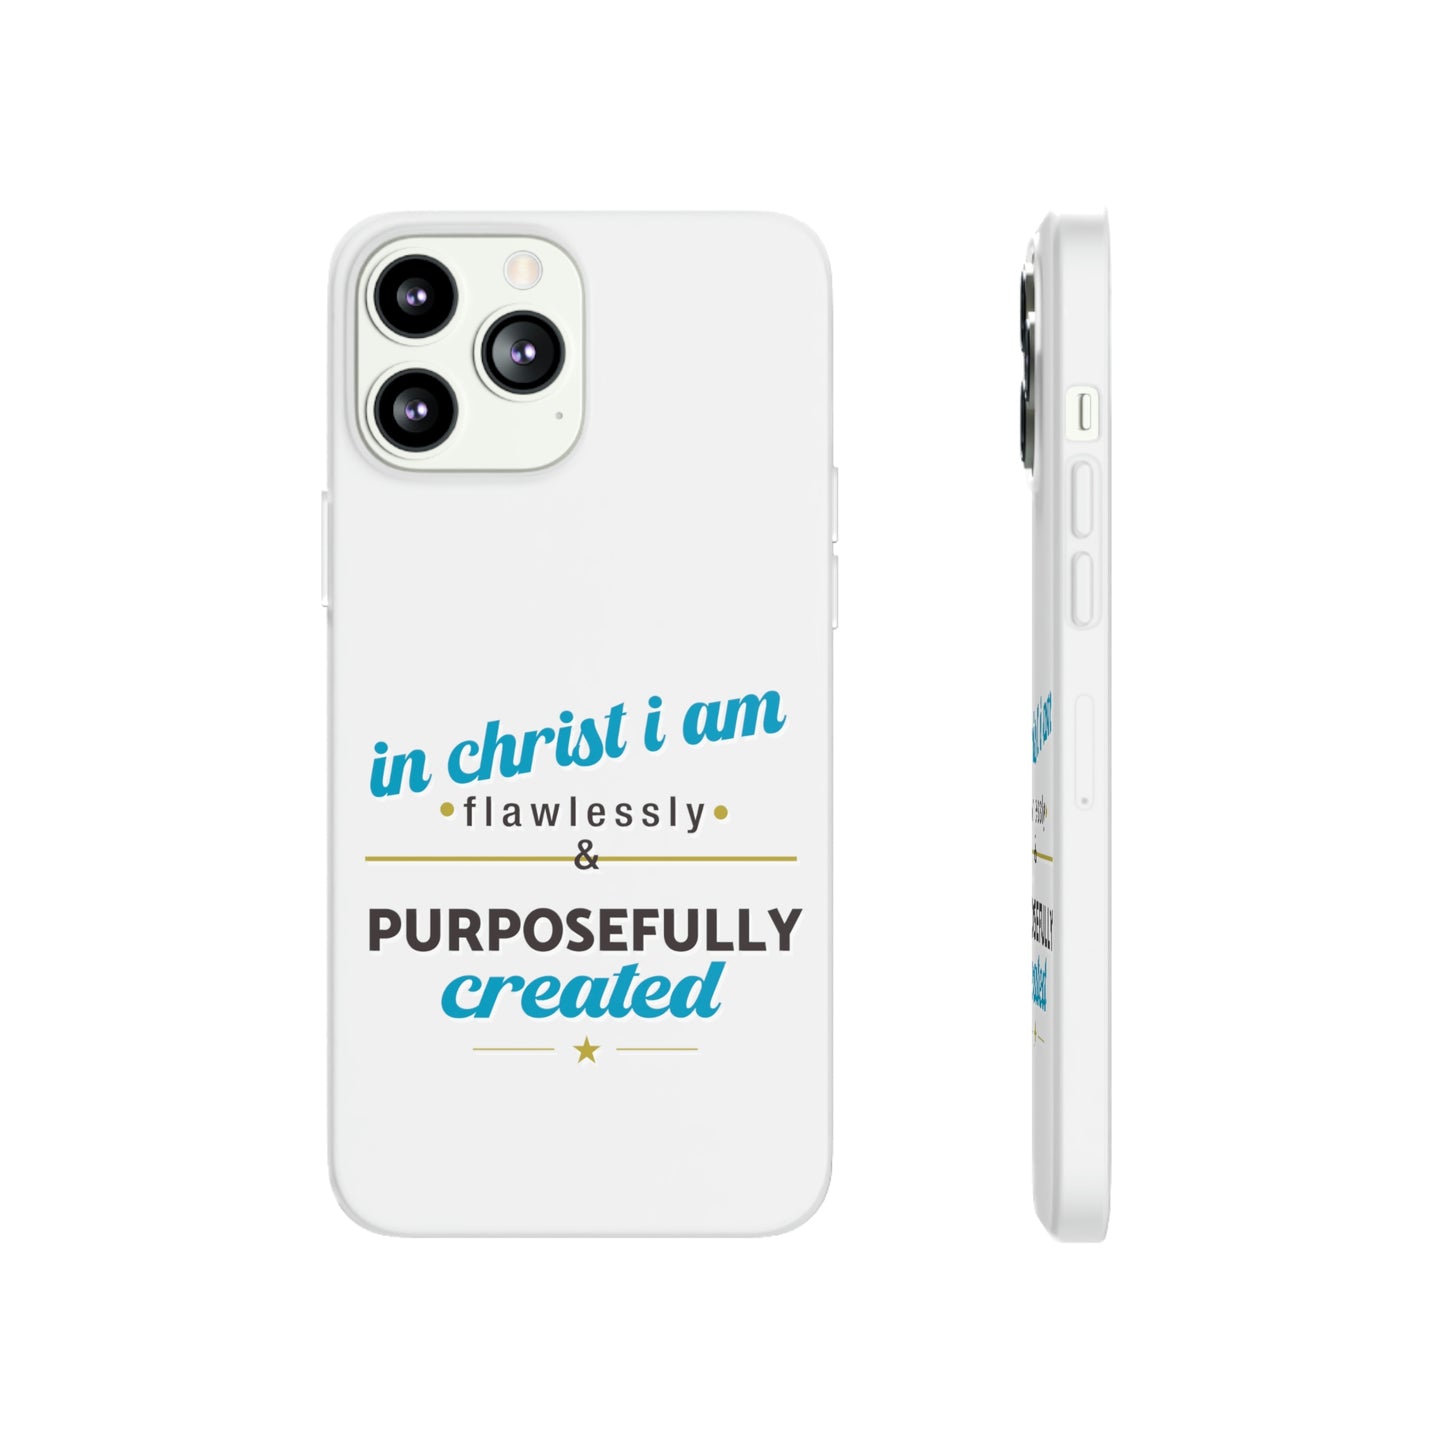 In Christ I Am Flawlessly & Purposefully Created Flexi Phone Case